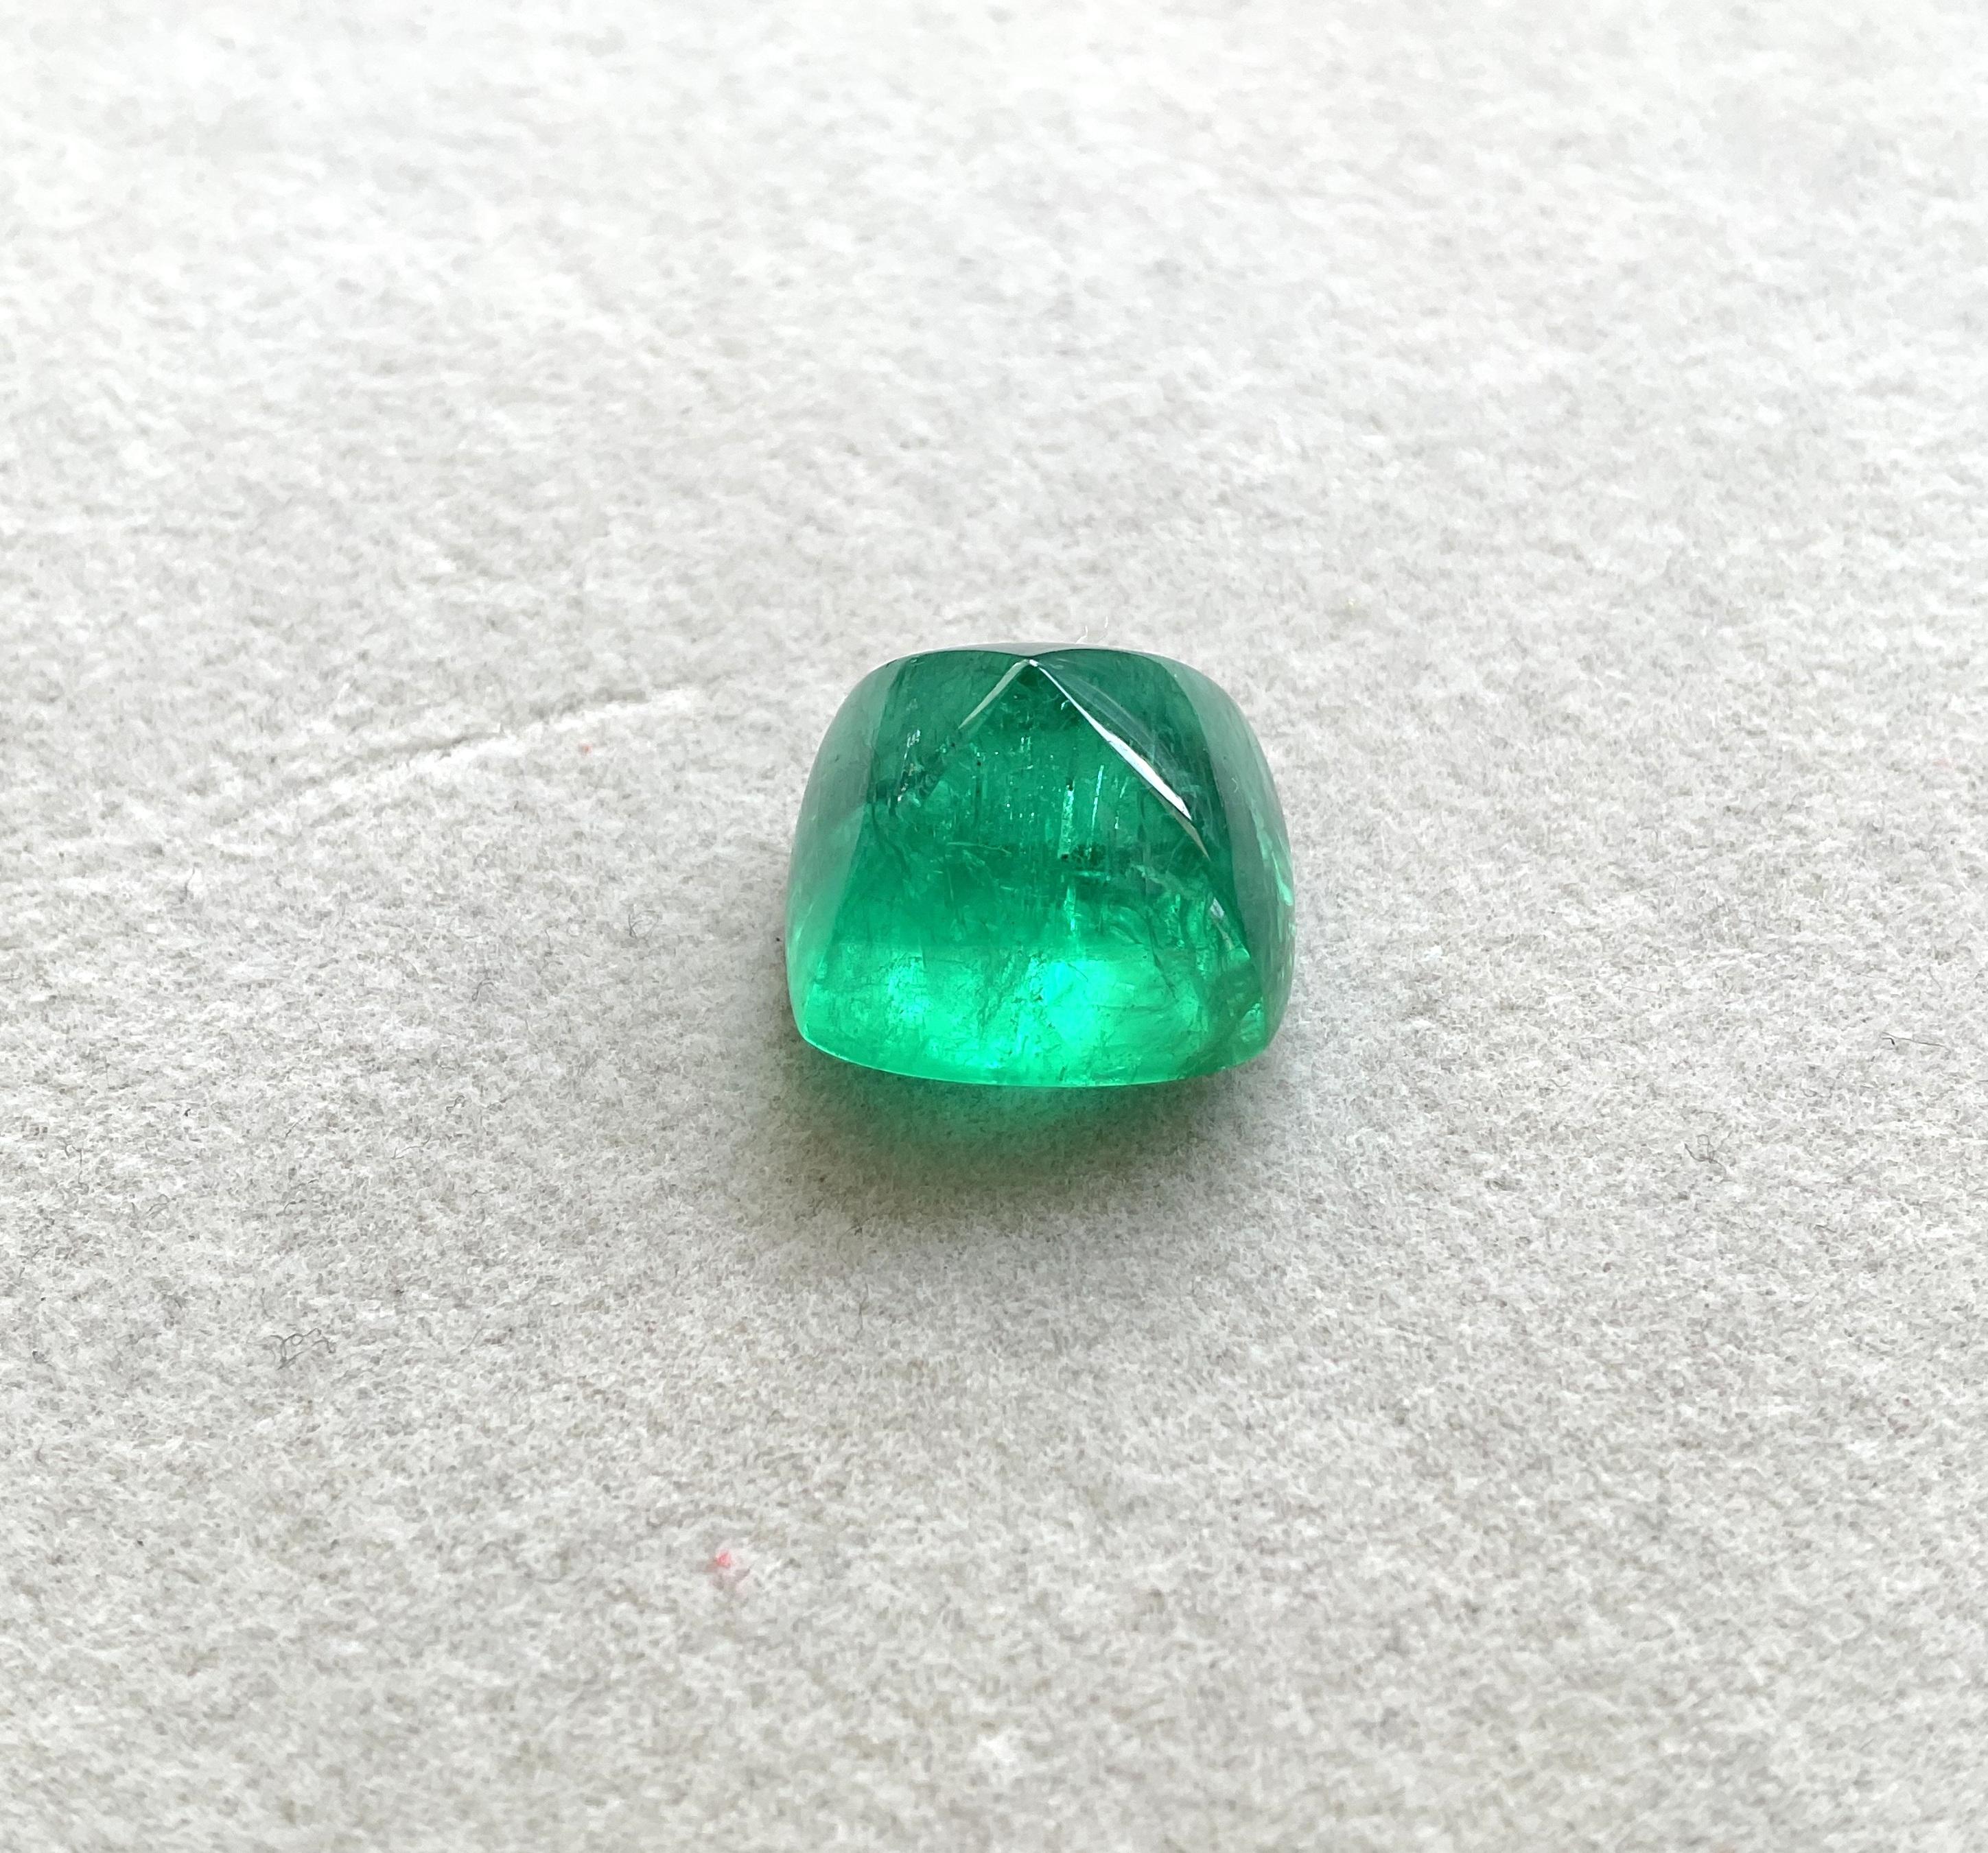 Certified 25.38 Cts Zambian Emerald Sugarloaf Cabochon Top Quality Natural Gem For Sale 3